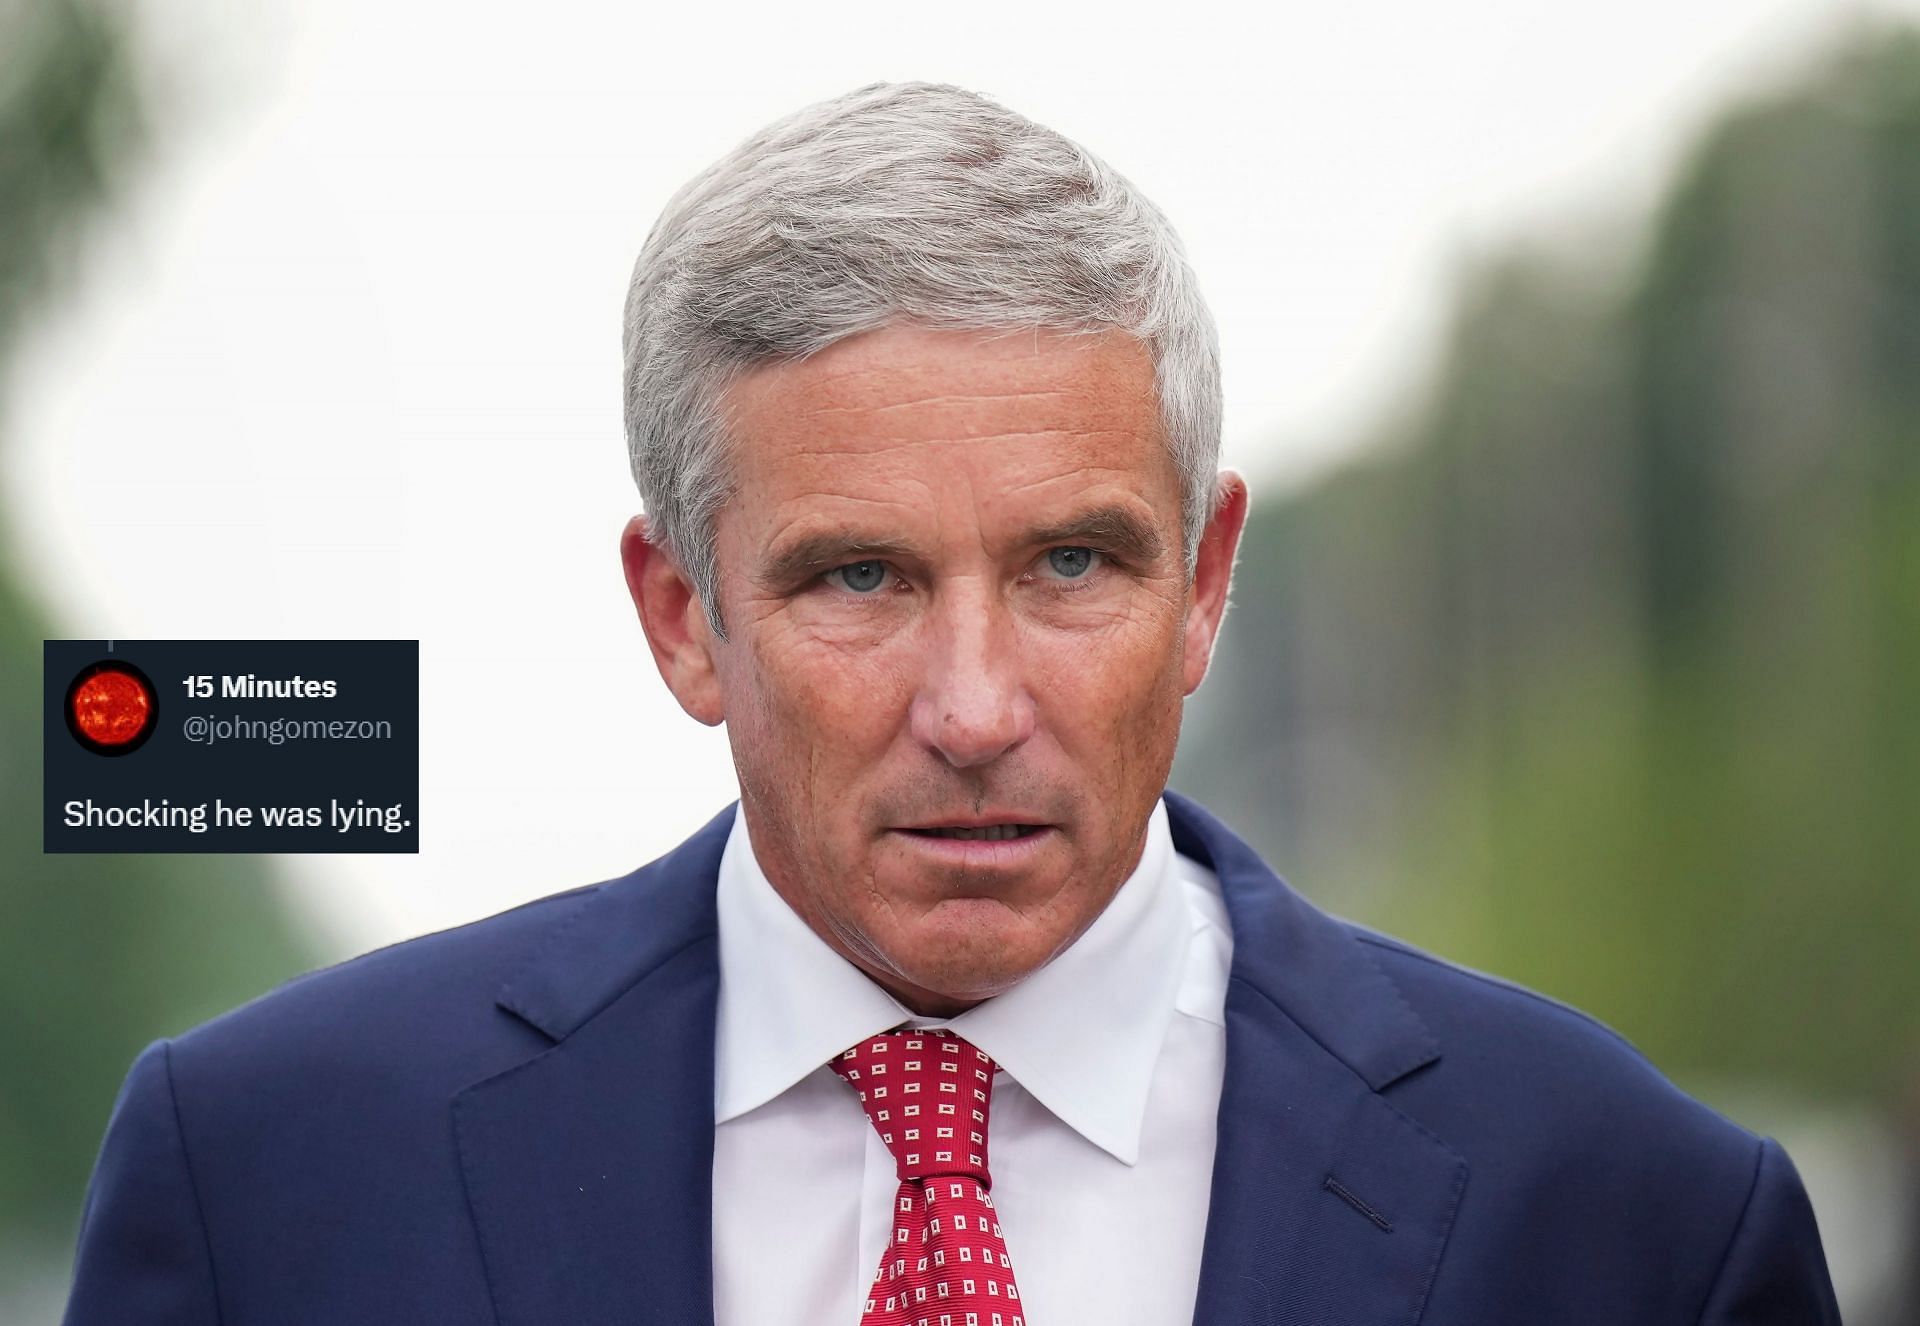 Fan have criticized the latest move by PGA Tour commissioner Jay Monahan